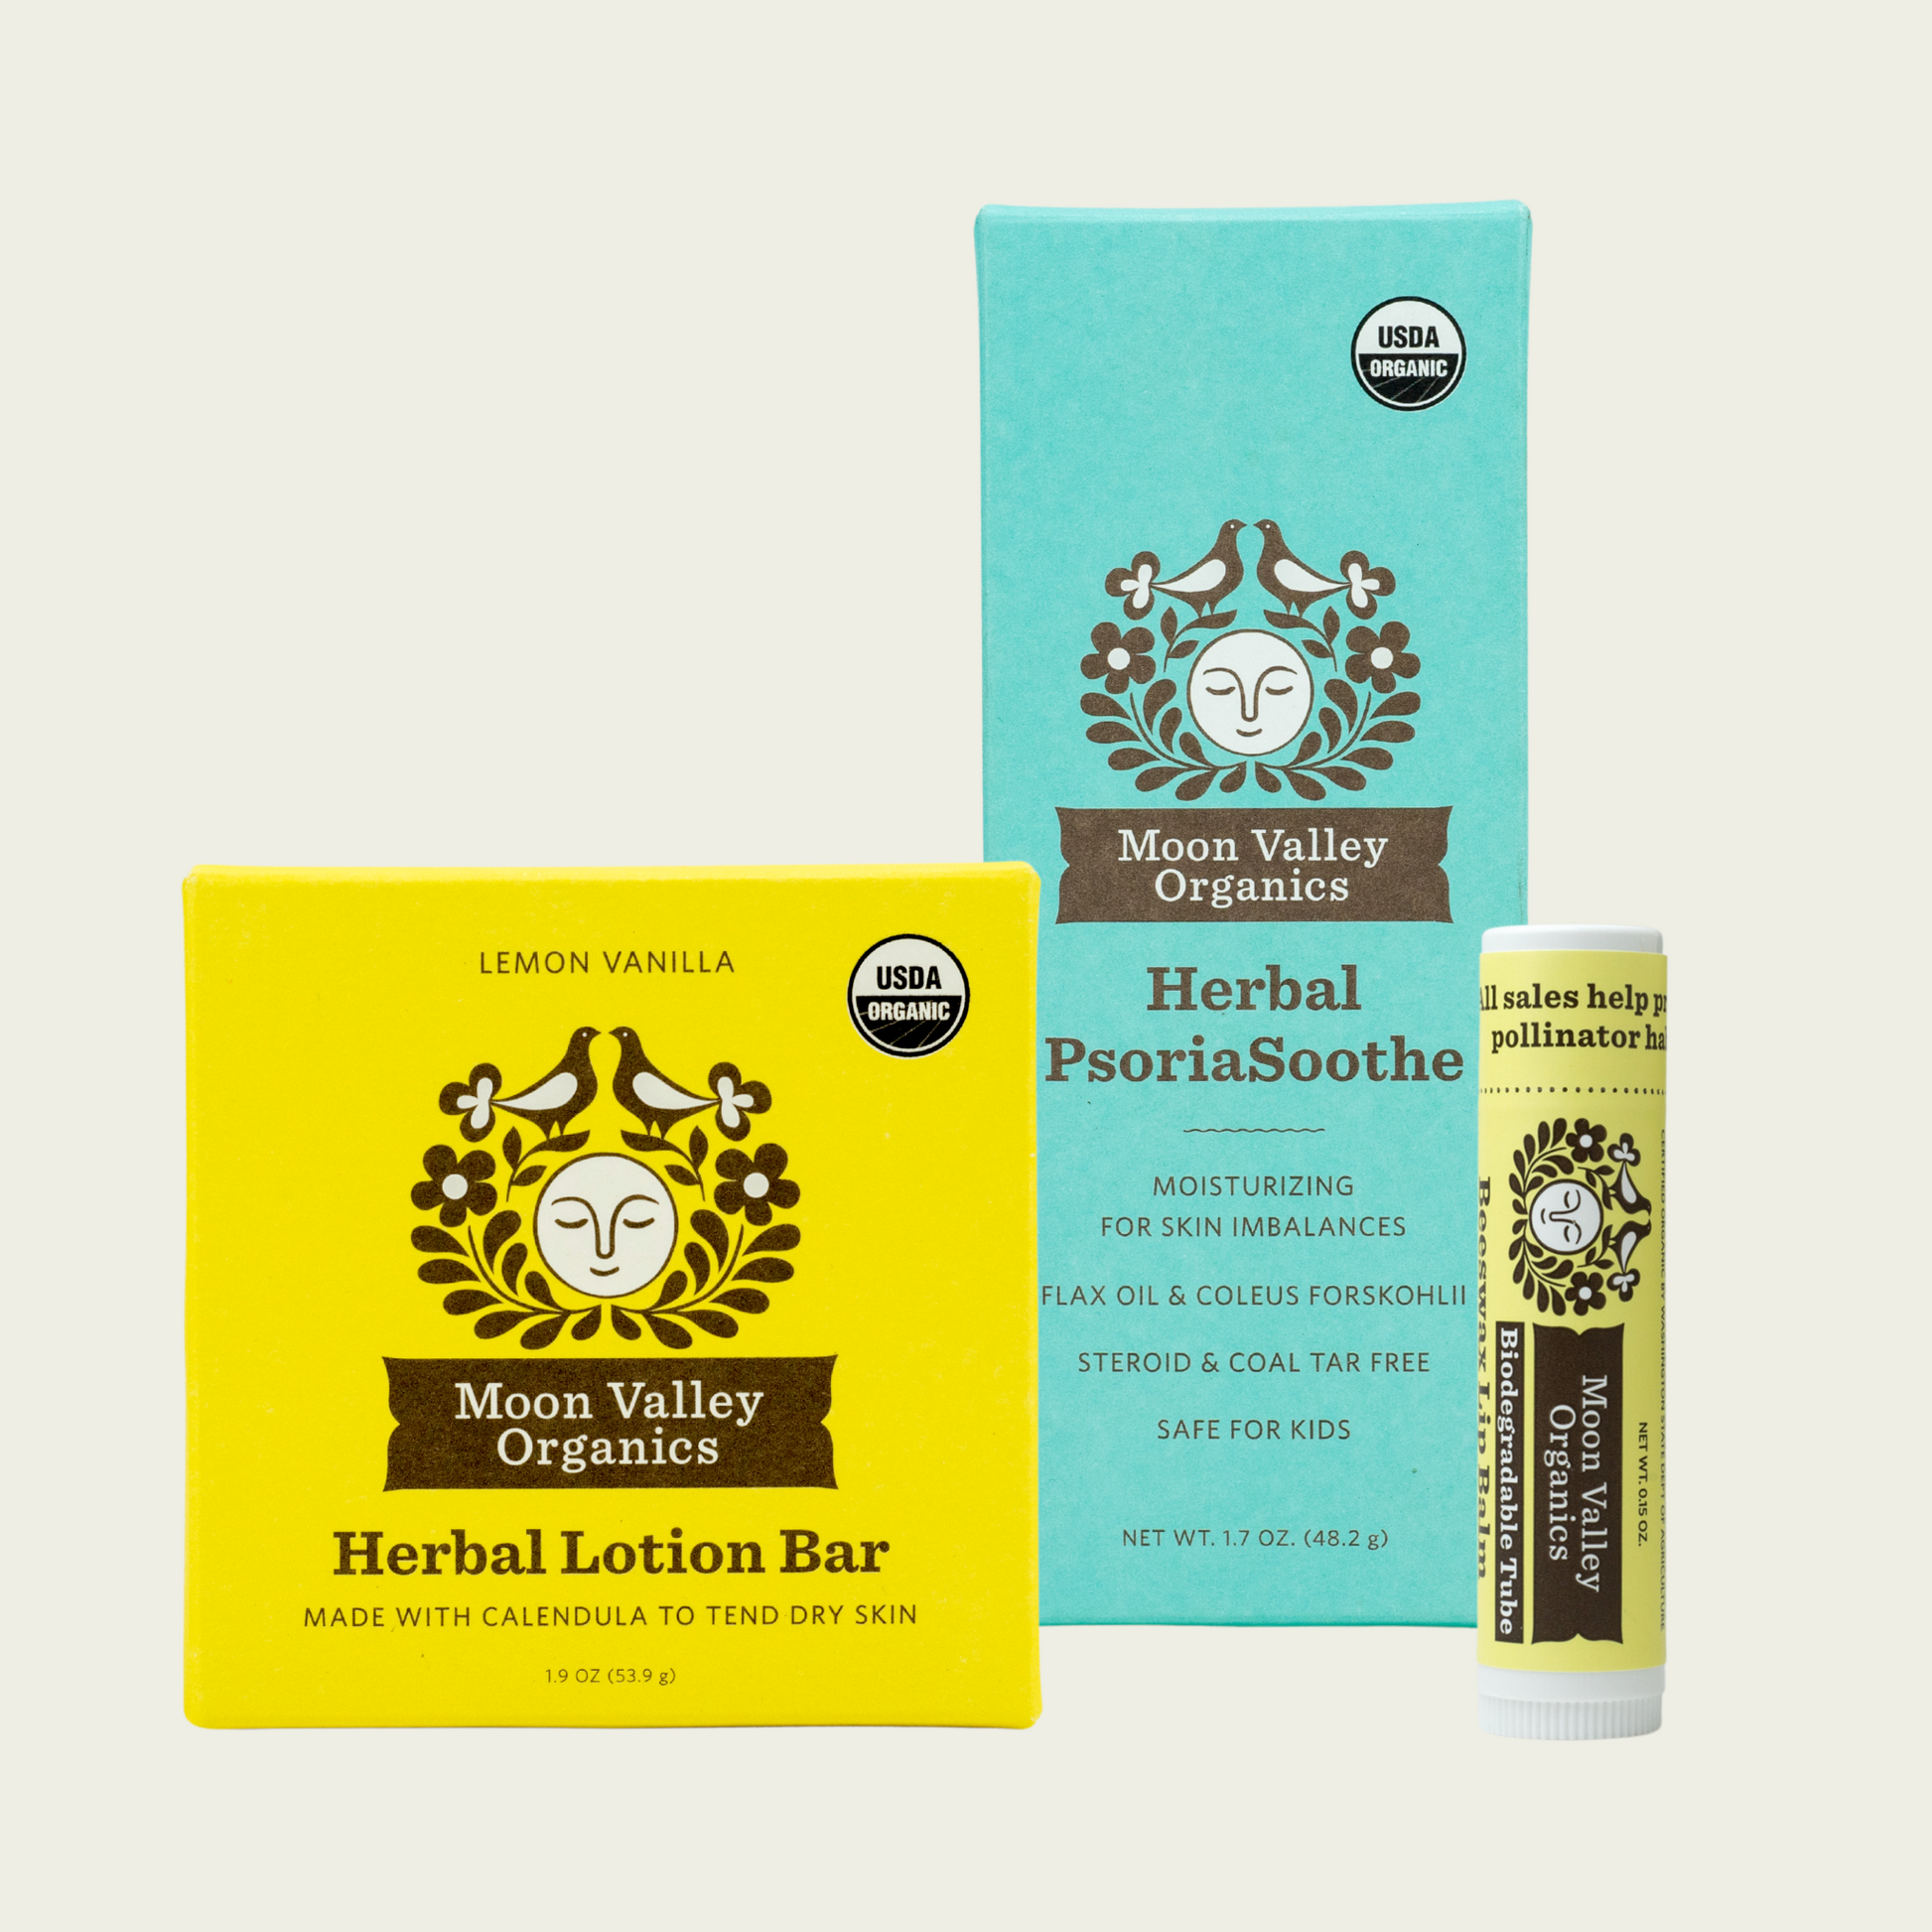 Moon Valley Organics Natural Body Collection Herbal PsoriaSoothe with Lip Balm and Lotion Bar Front Boxes